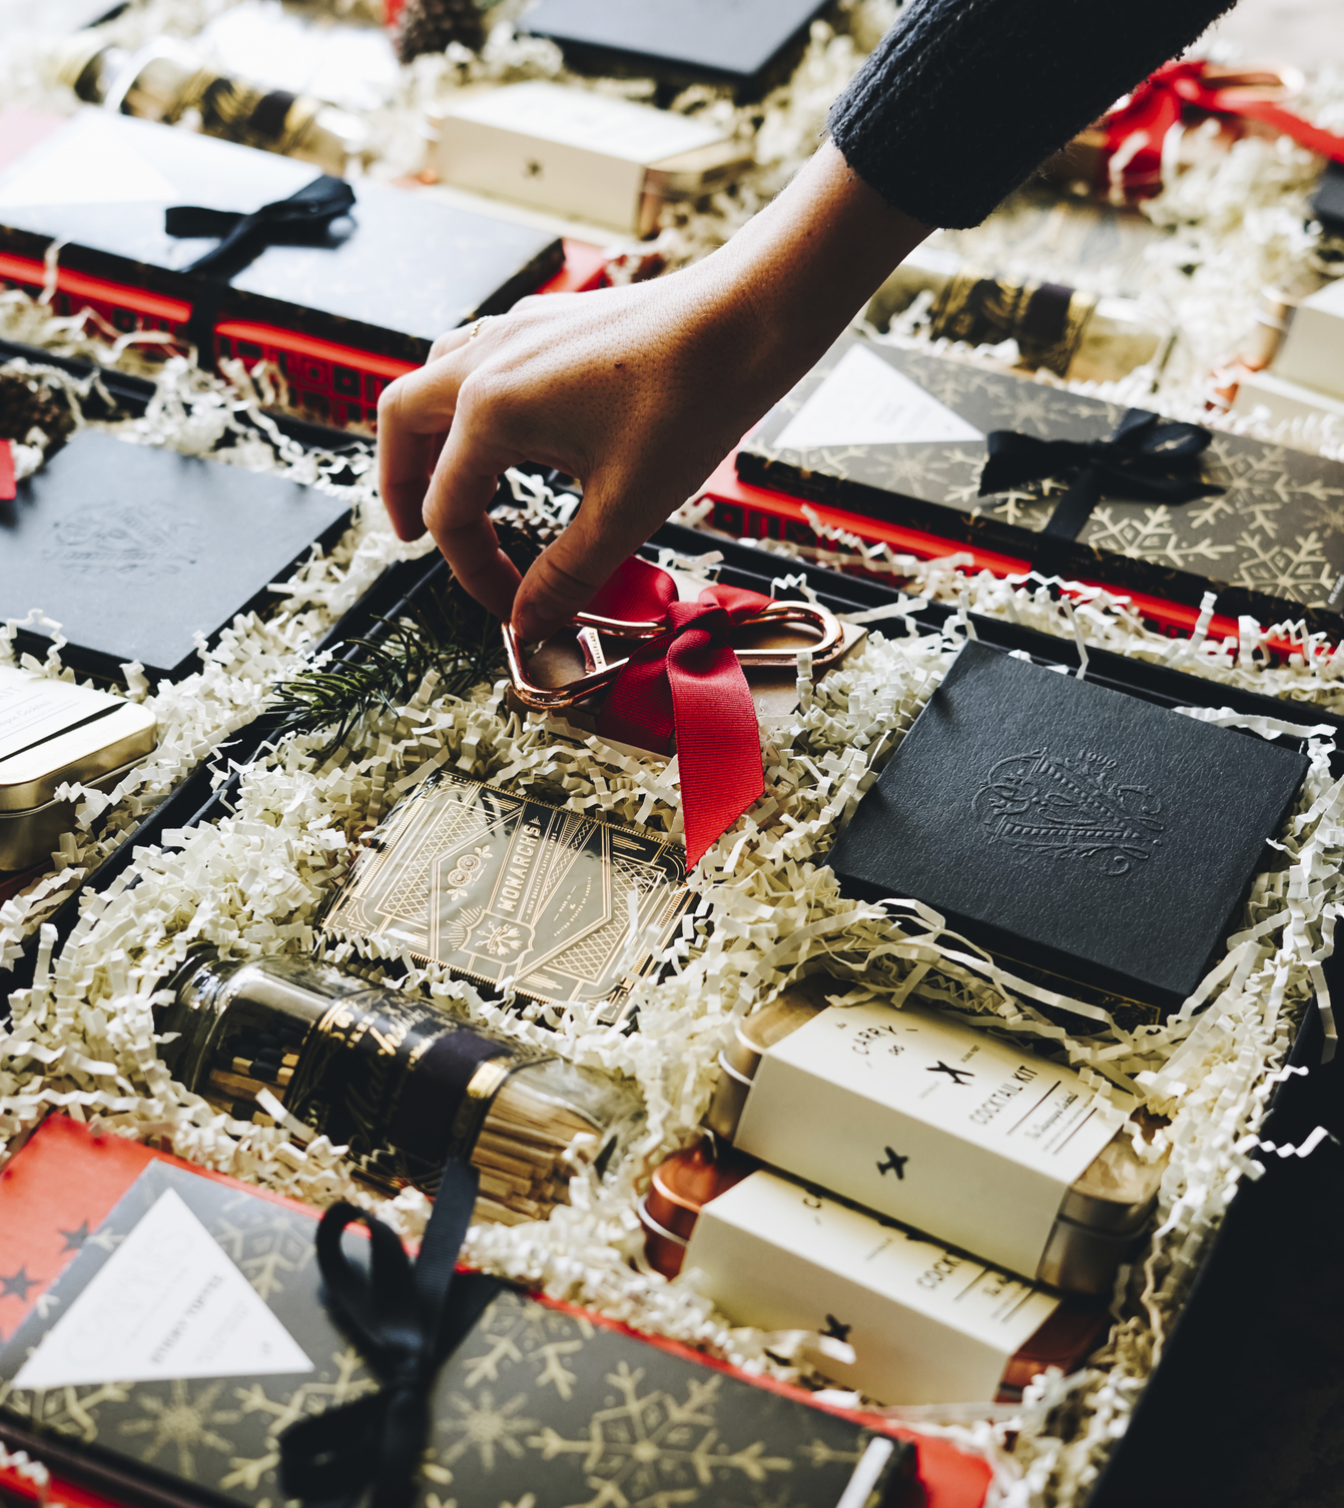 Ask The Expert: How Do I Get a Head Start on my Corporate Holiday Gifting?